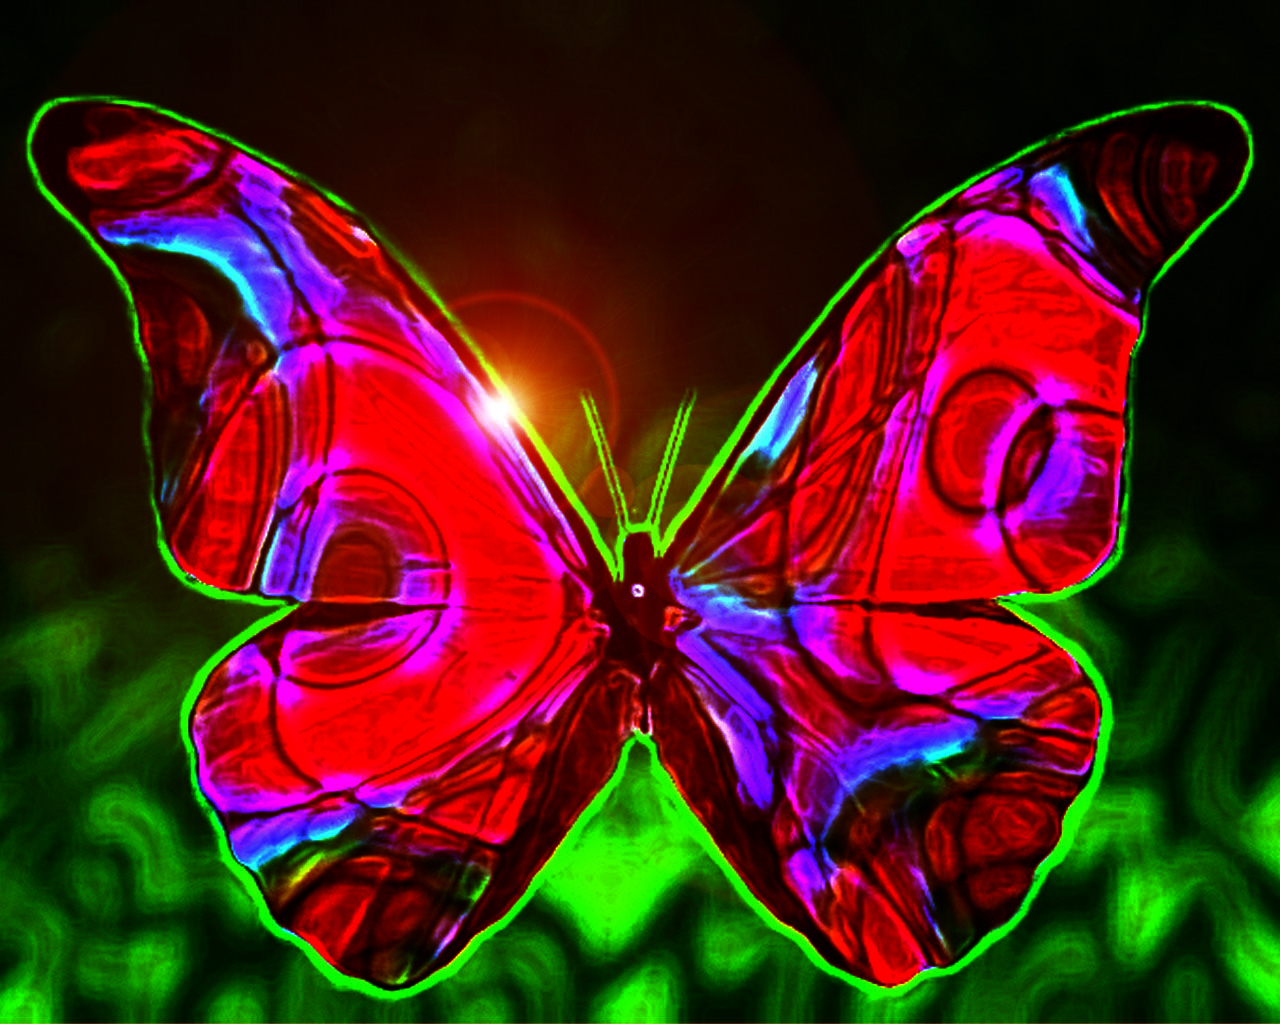 Background Wallpaper On This Butterfly Website